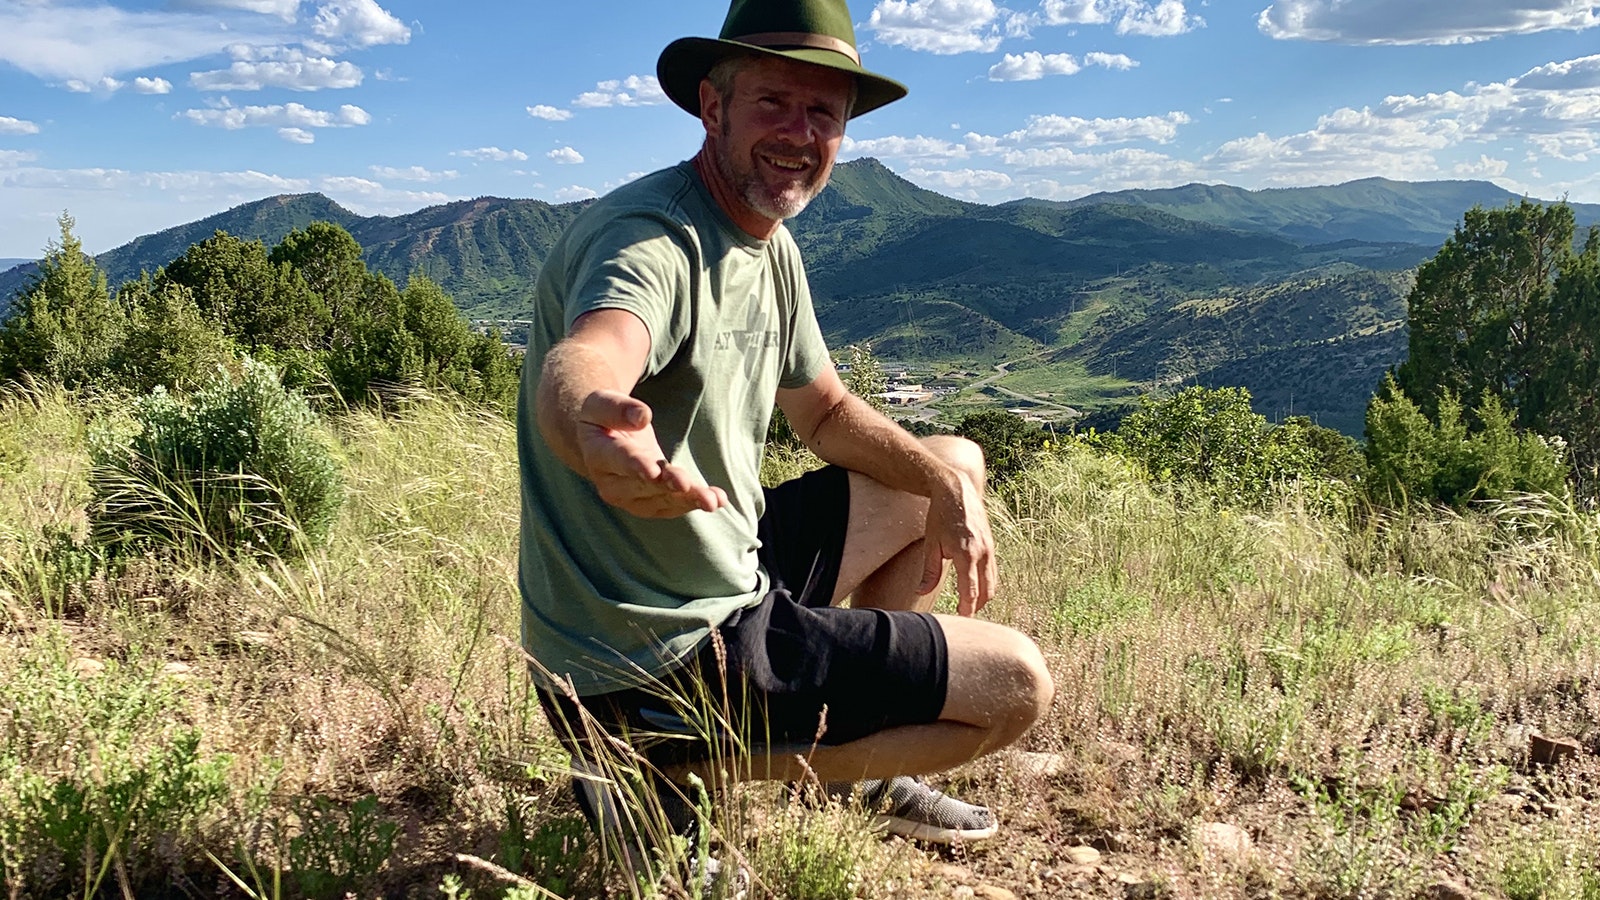 Archaeologist Dr. Steven Howard is tasked with building a new field school at Eastern Wyoming College, and help turn the Sunrise, Wyoming, area's significant archaeological site into a tourism draw.